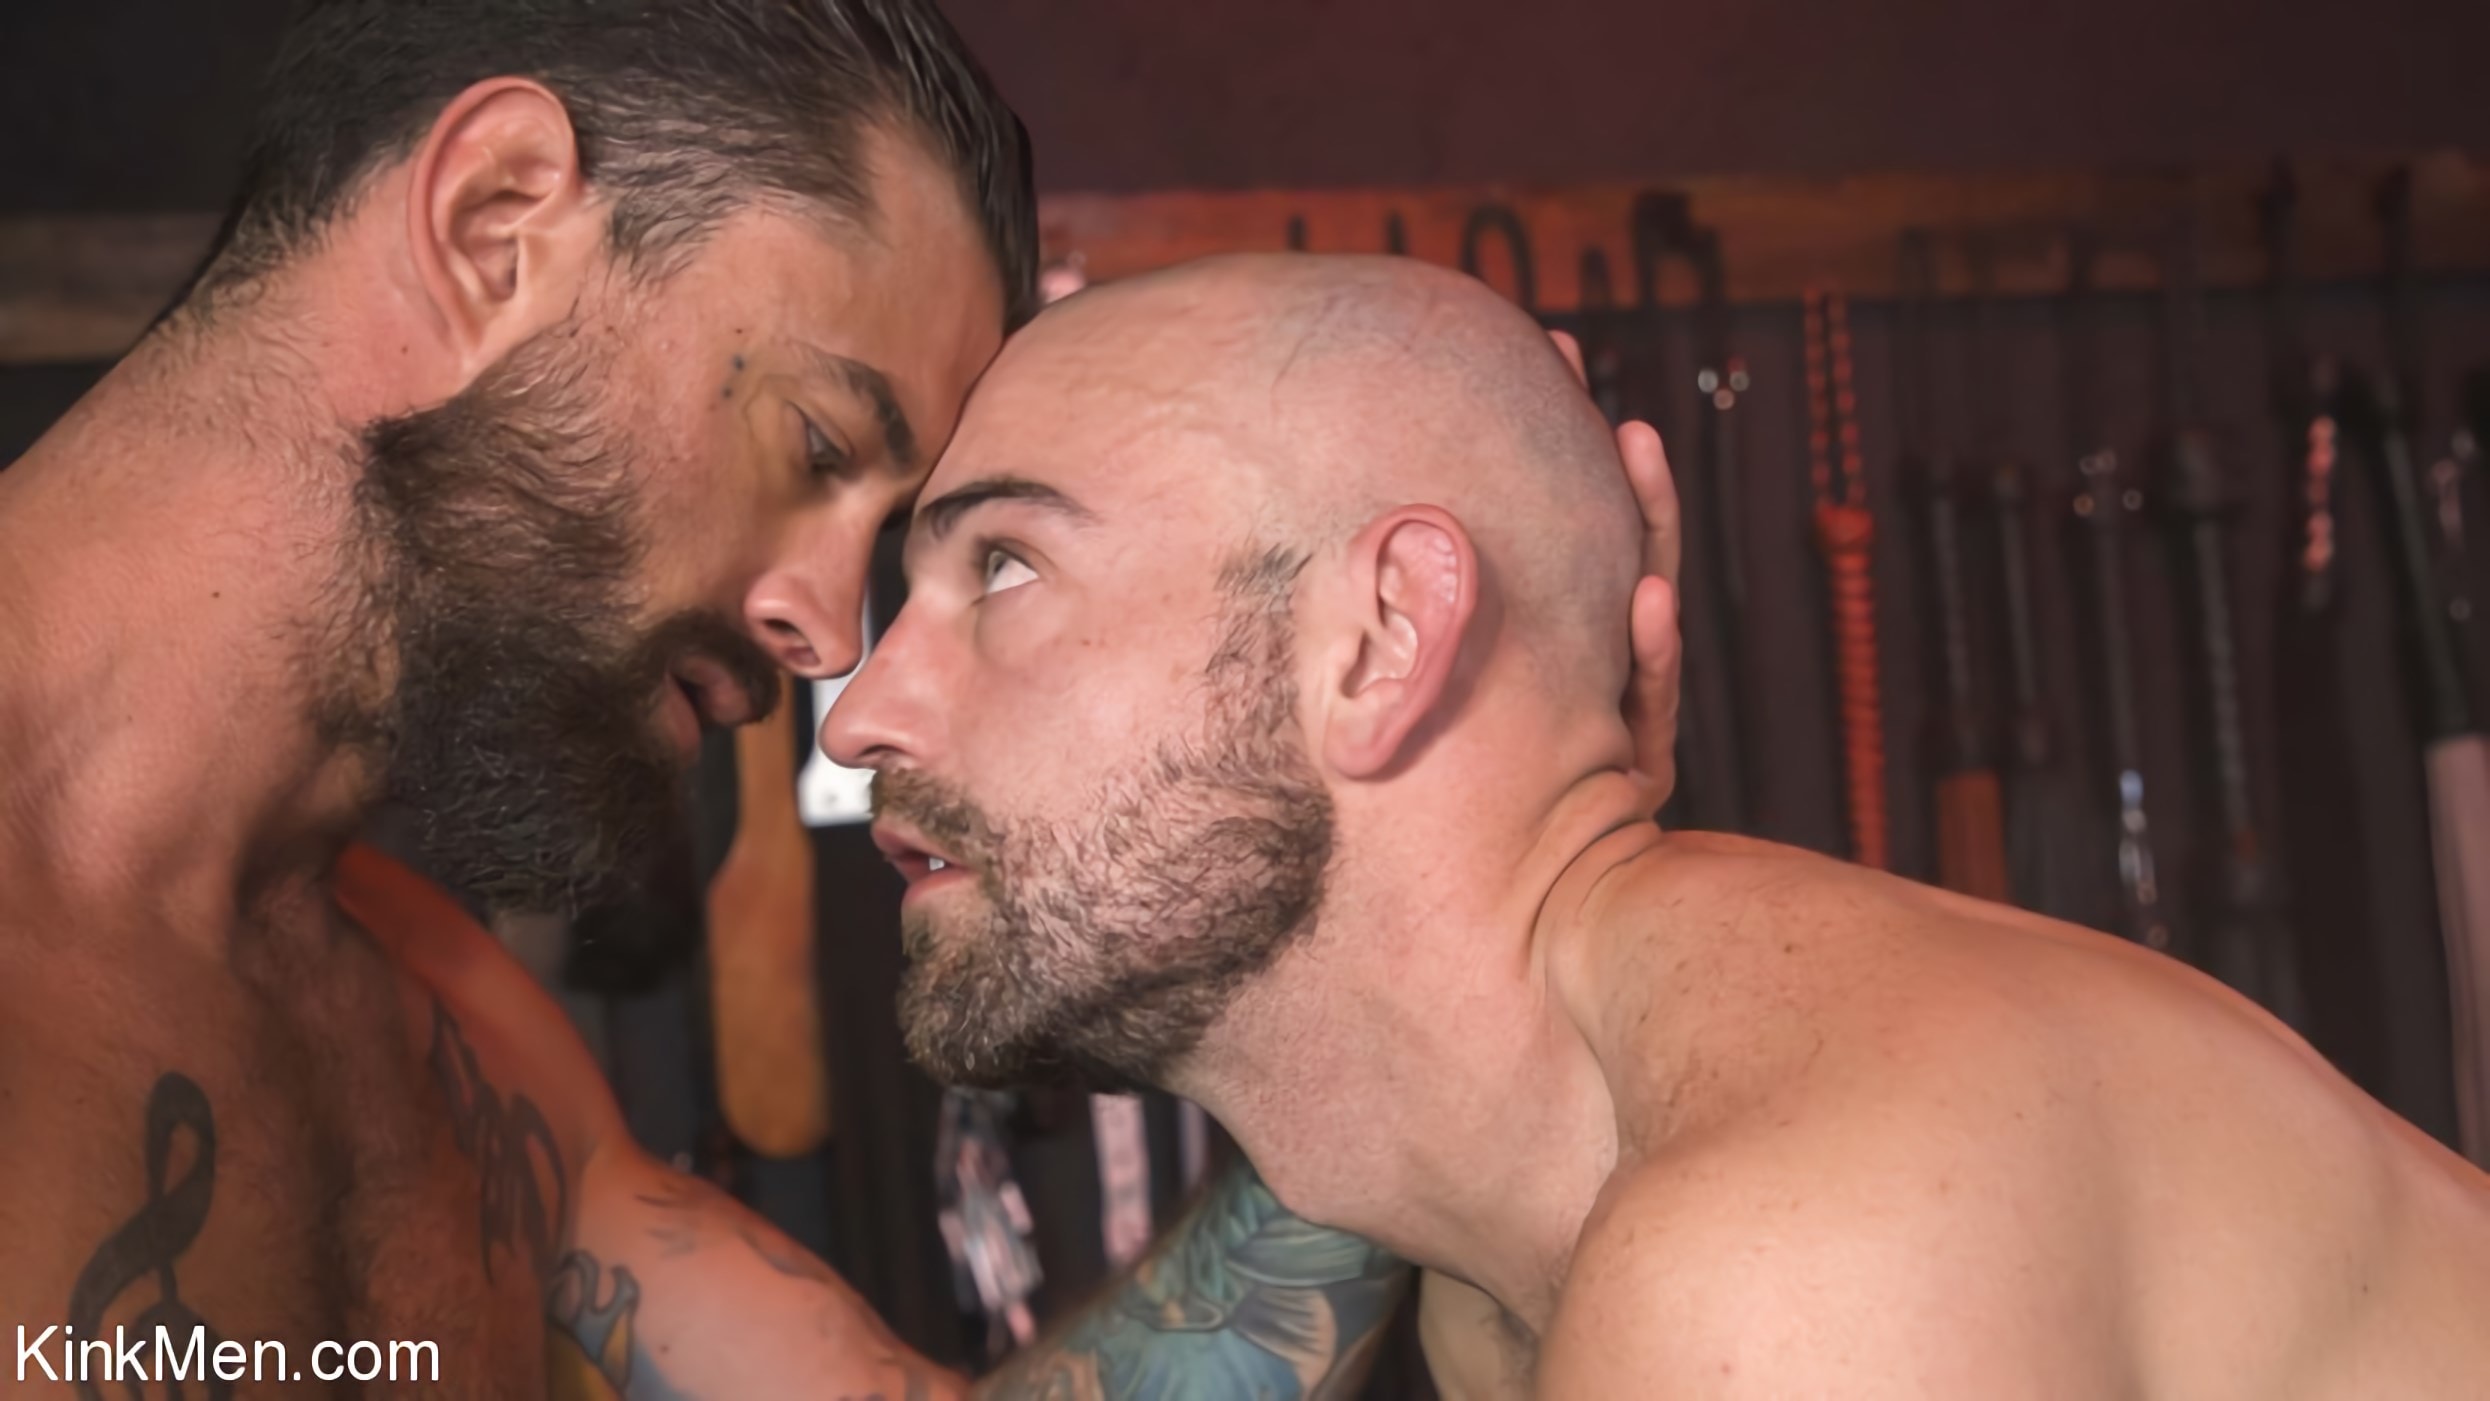 Kink Men 'In The Doghouse: Alpha Wolfe Stretches Pup Riley Landon's Hole' starring Alpha Wolfe (Photo 23)